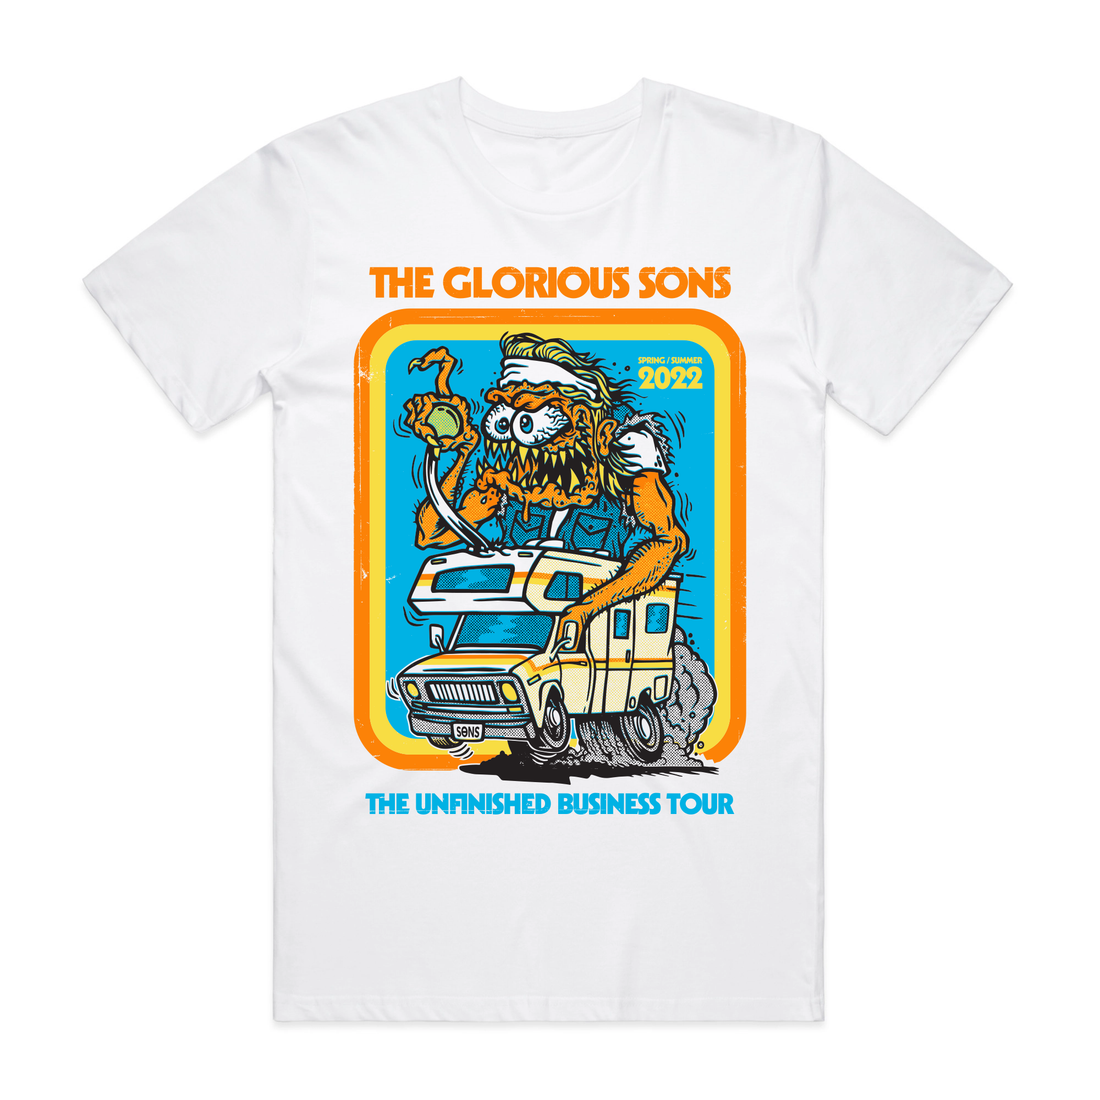 The Glorious Sons - The Unfinished Business - Tour Tee - White